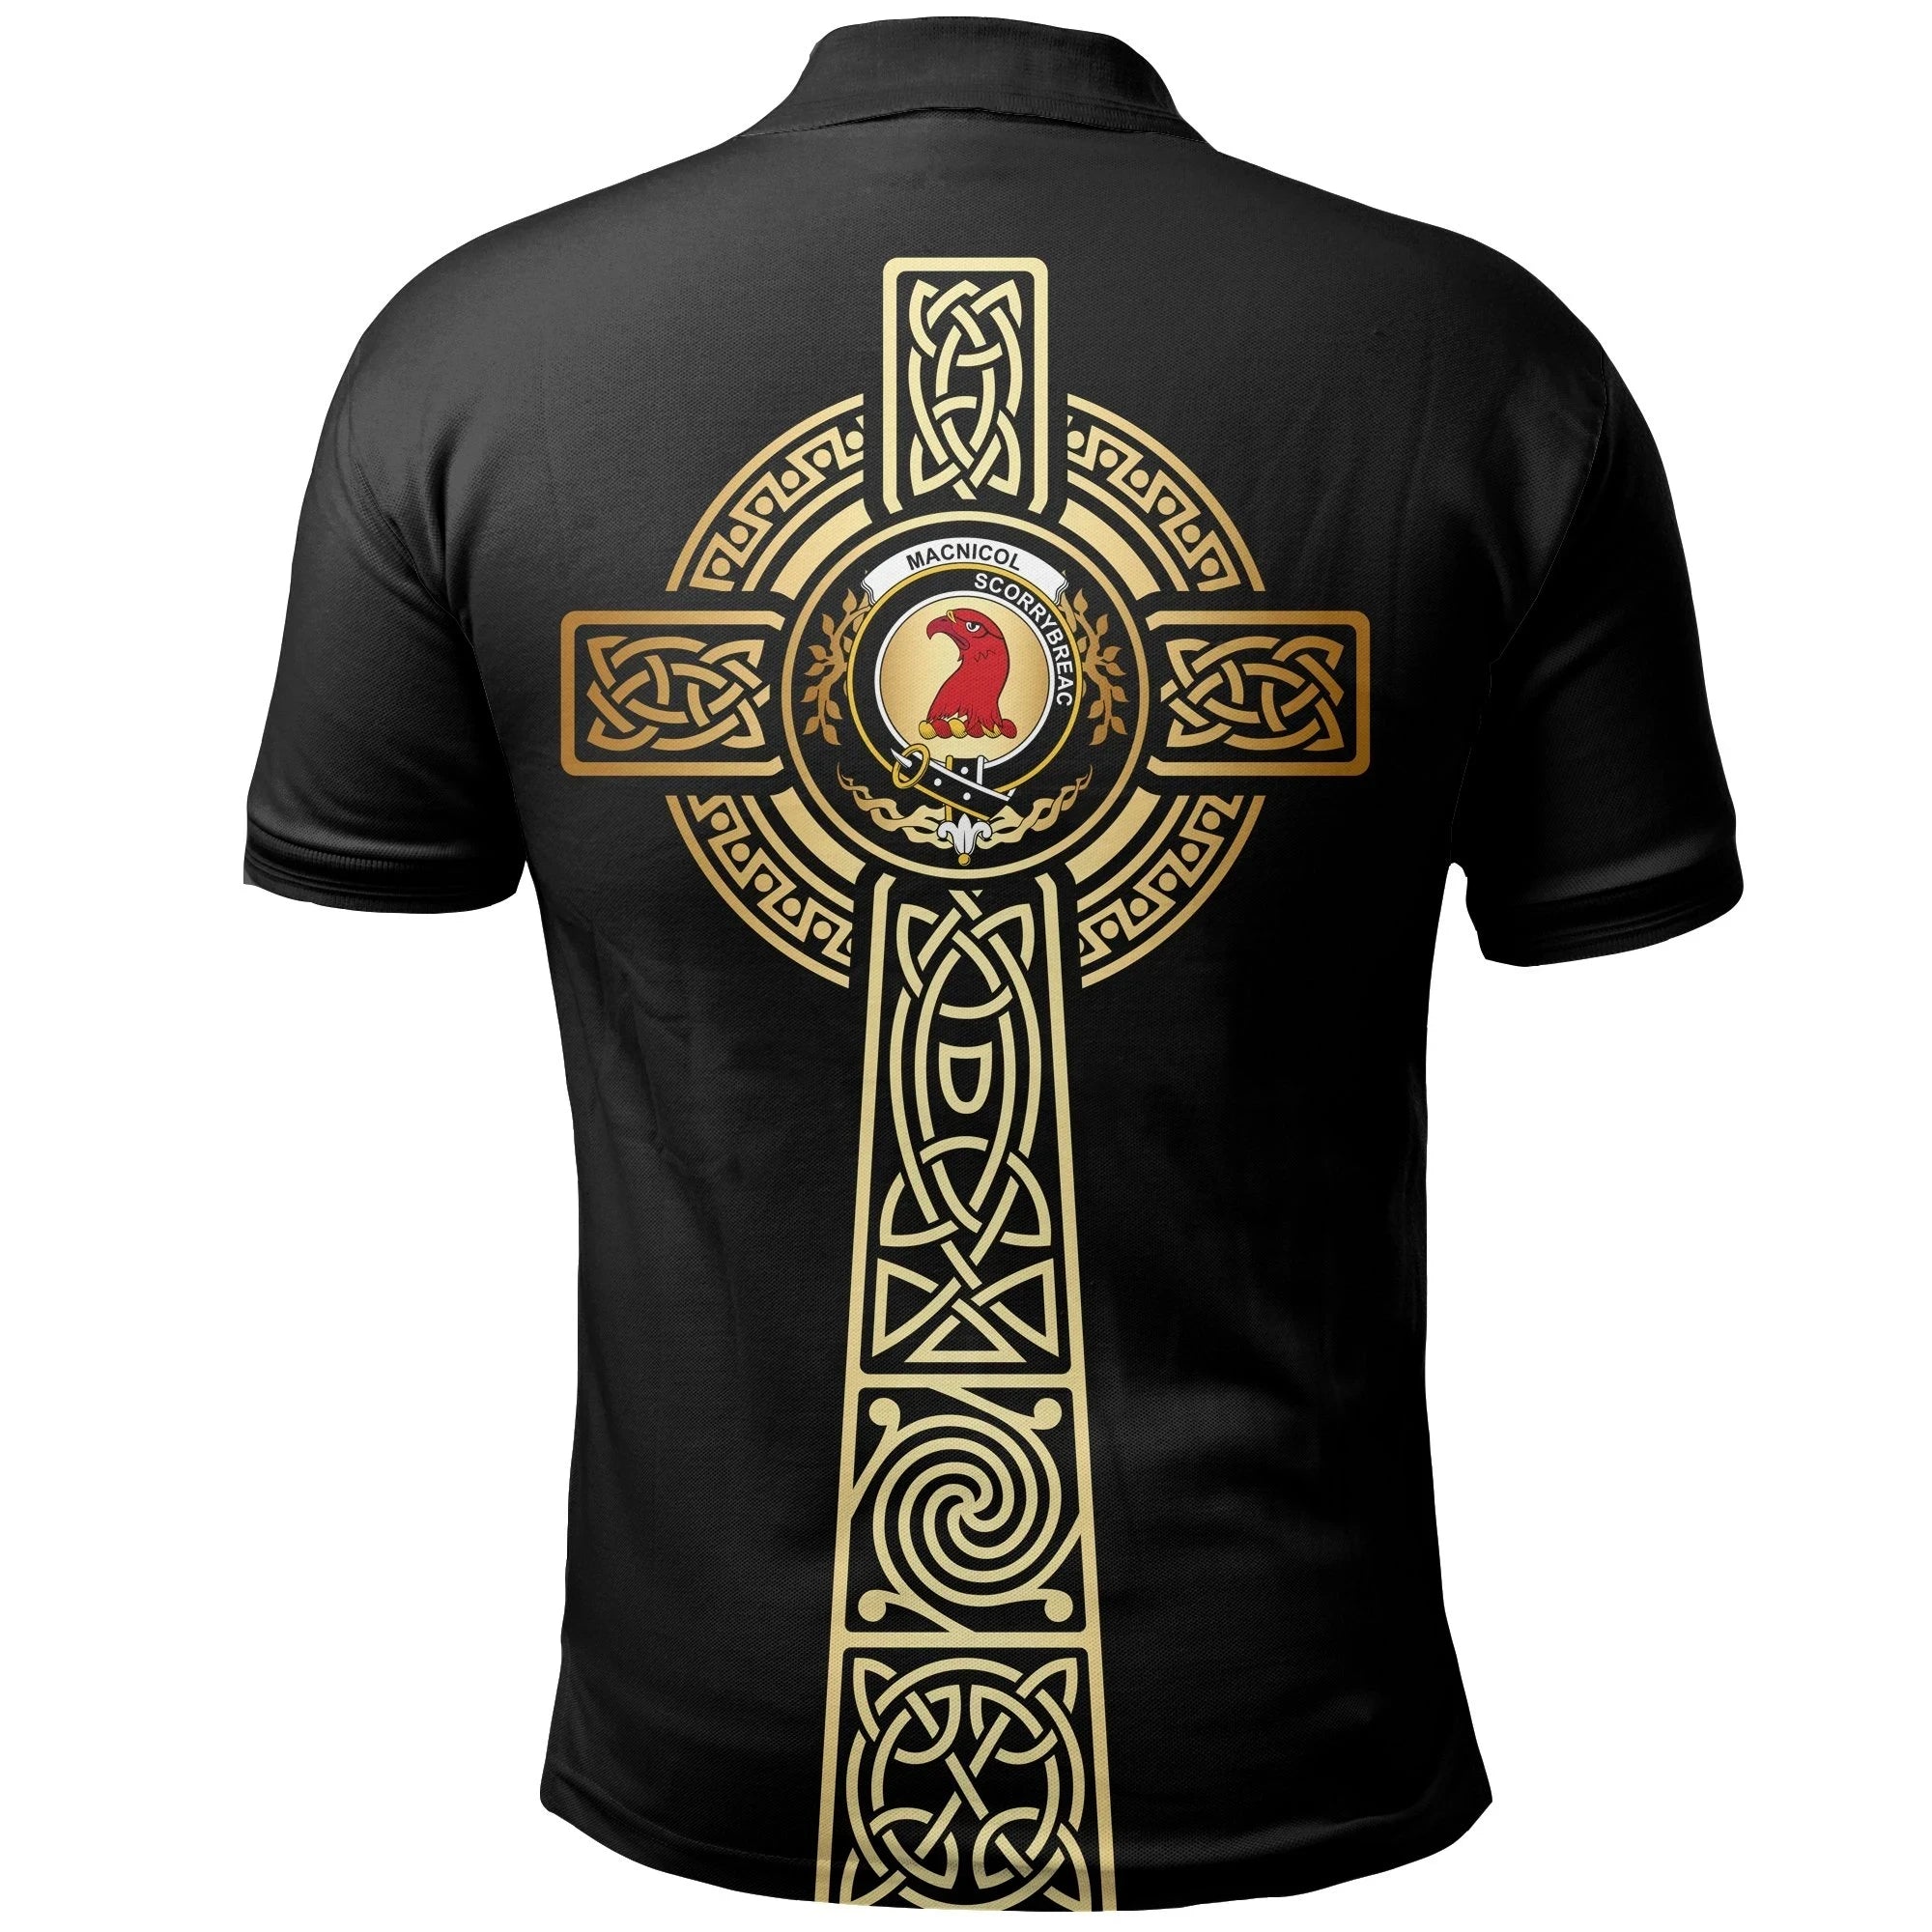 MacNicol (of Scorrybreac) Clan Polo Shirt, Scottish Tartan MacNicol (of Scorrybreac) Clans Polo Shirt Tree Of Life Style